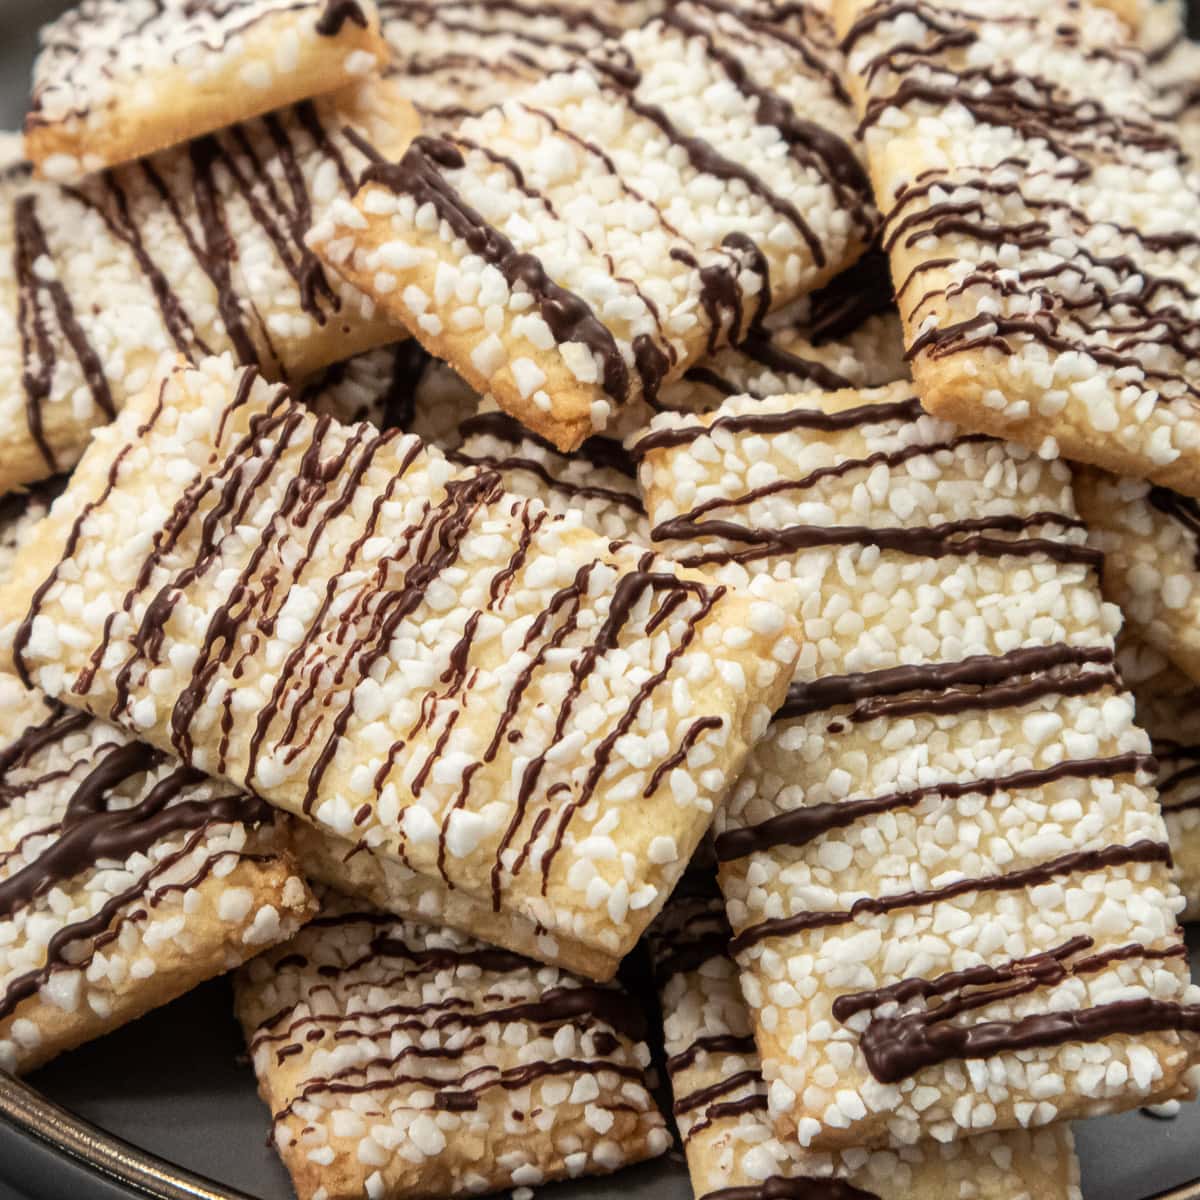 Spritz bars are easier than the cookies and every bit as good.